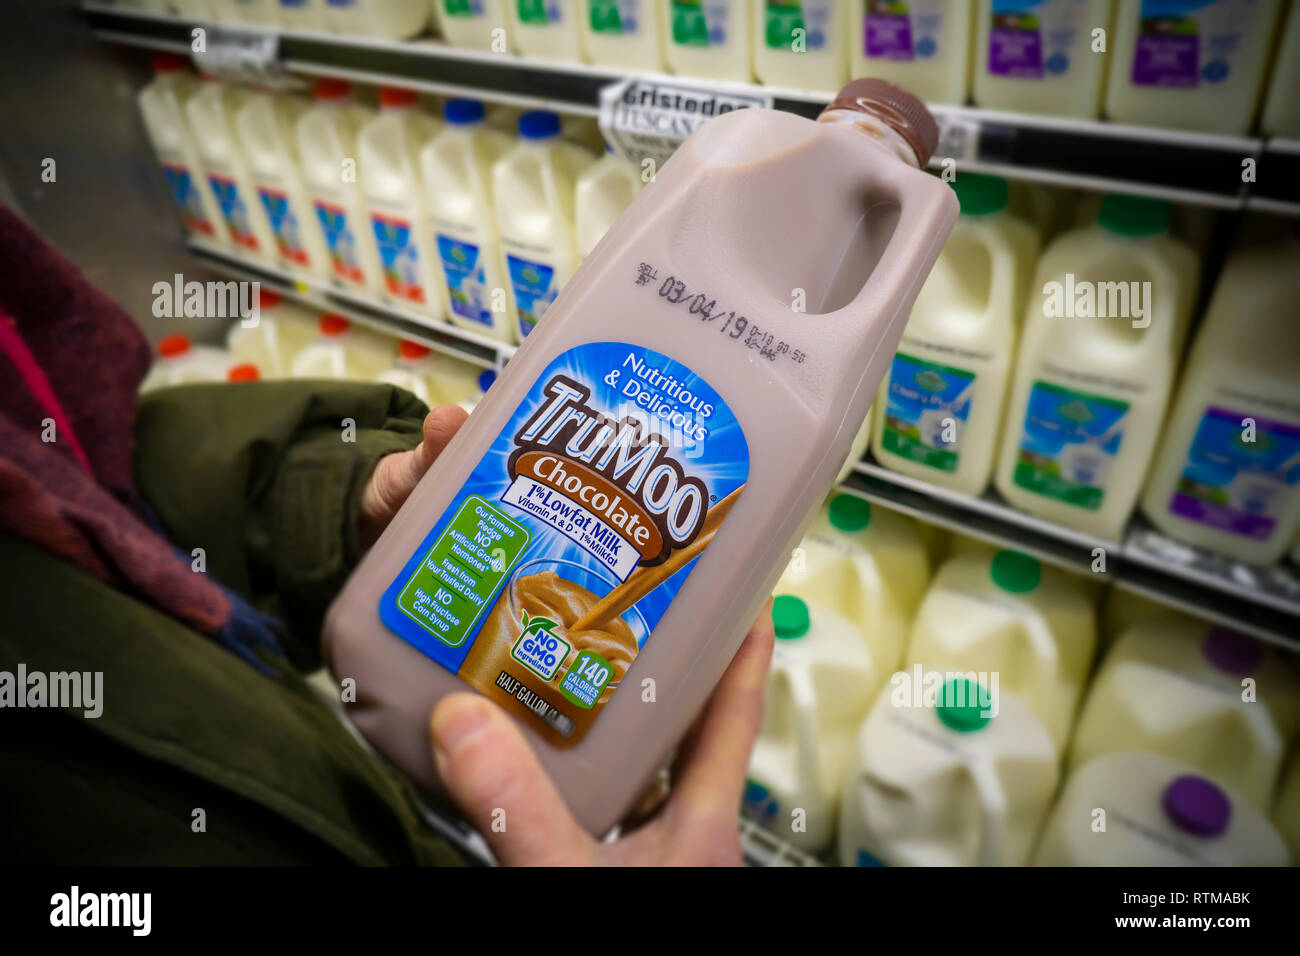 https://c8.alamy.com/comp/RTMABK/a-shopper-chooses-a-half-gallon-jug-of-dairy-producer-dean-foods-trumoo-brand-chcolate-flavored-milk-in-a-supermarket-in-new-york-on-tuesday-february-26-2019-dean-foods-is-scheduled-to-report-earnings-on-wednesday-prior-to-the-bell-richard-b-levine-RTMABK.jpg